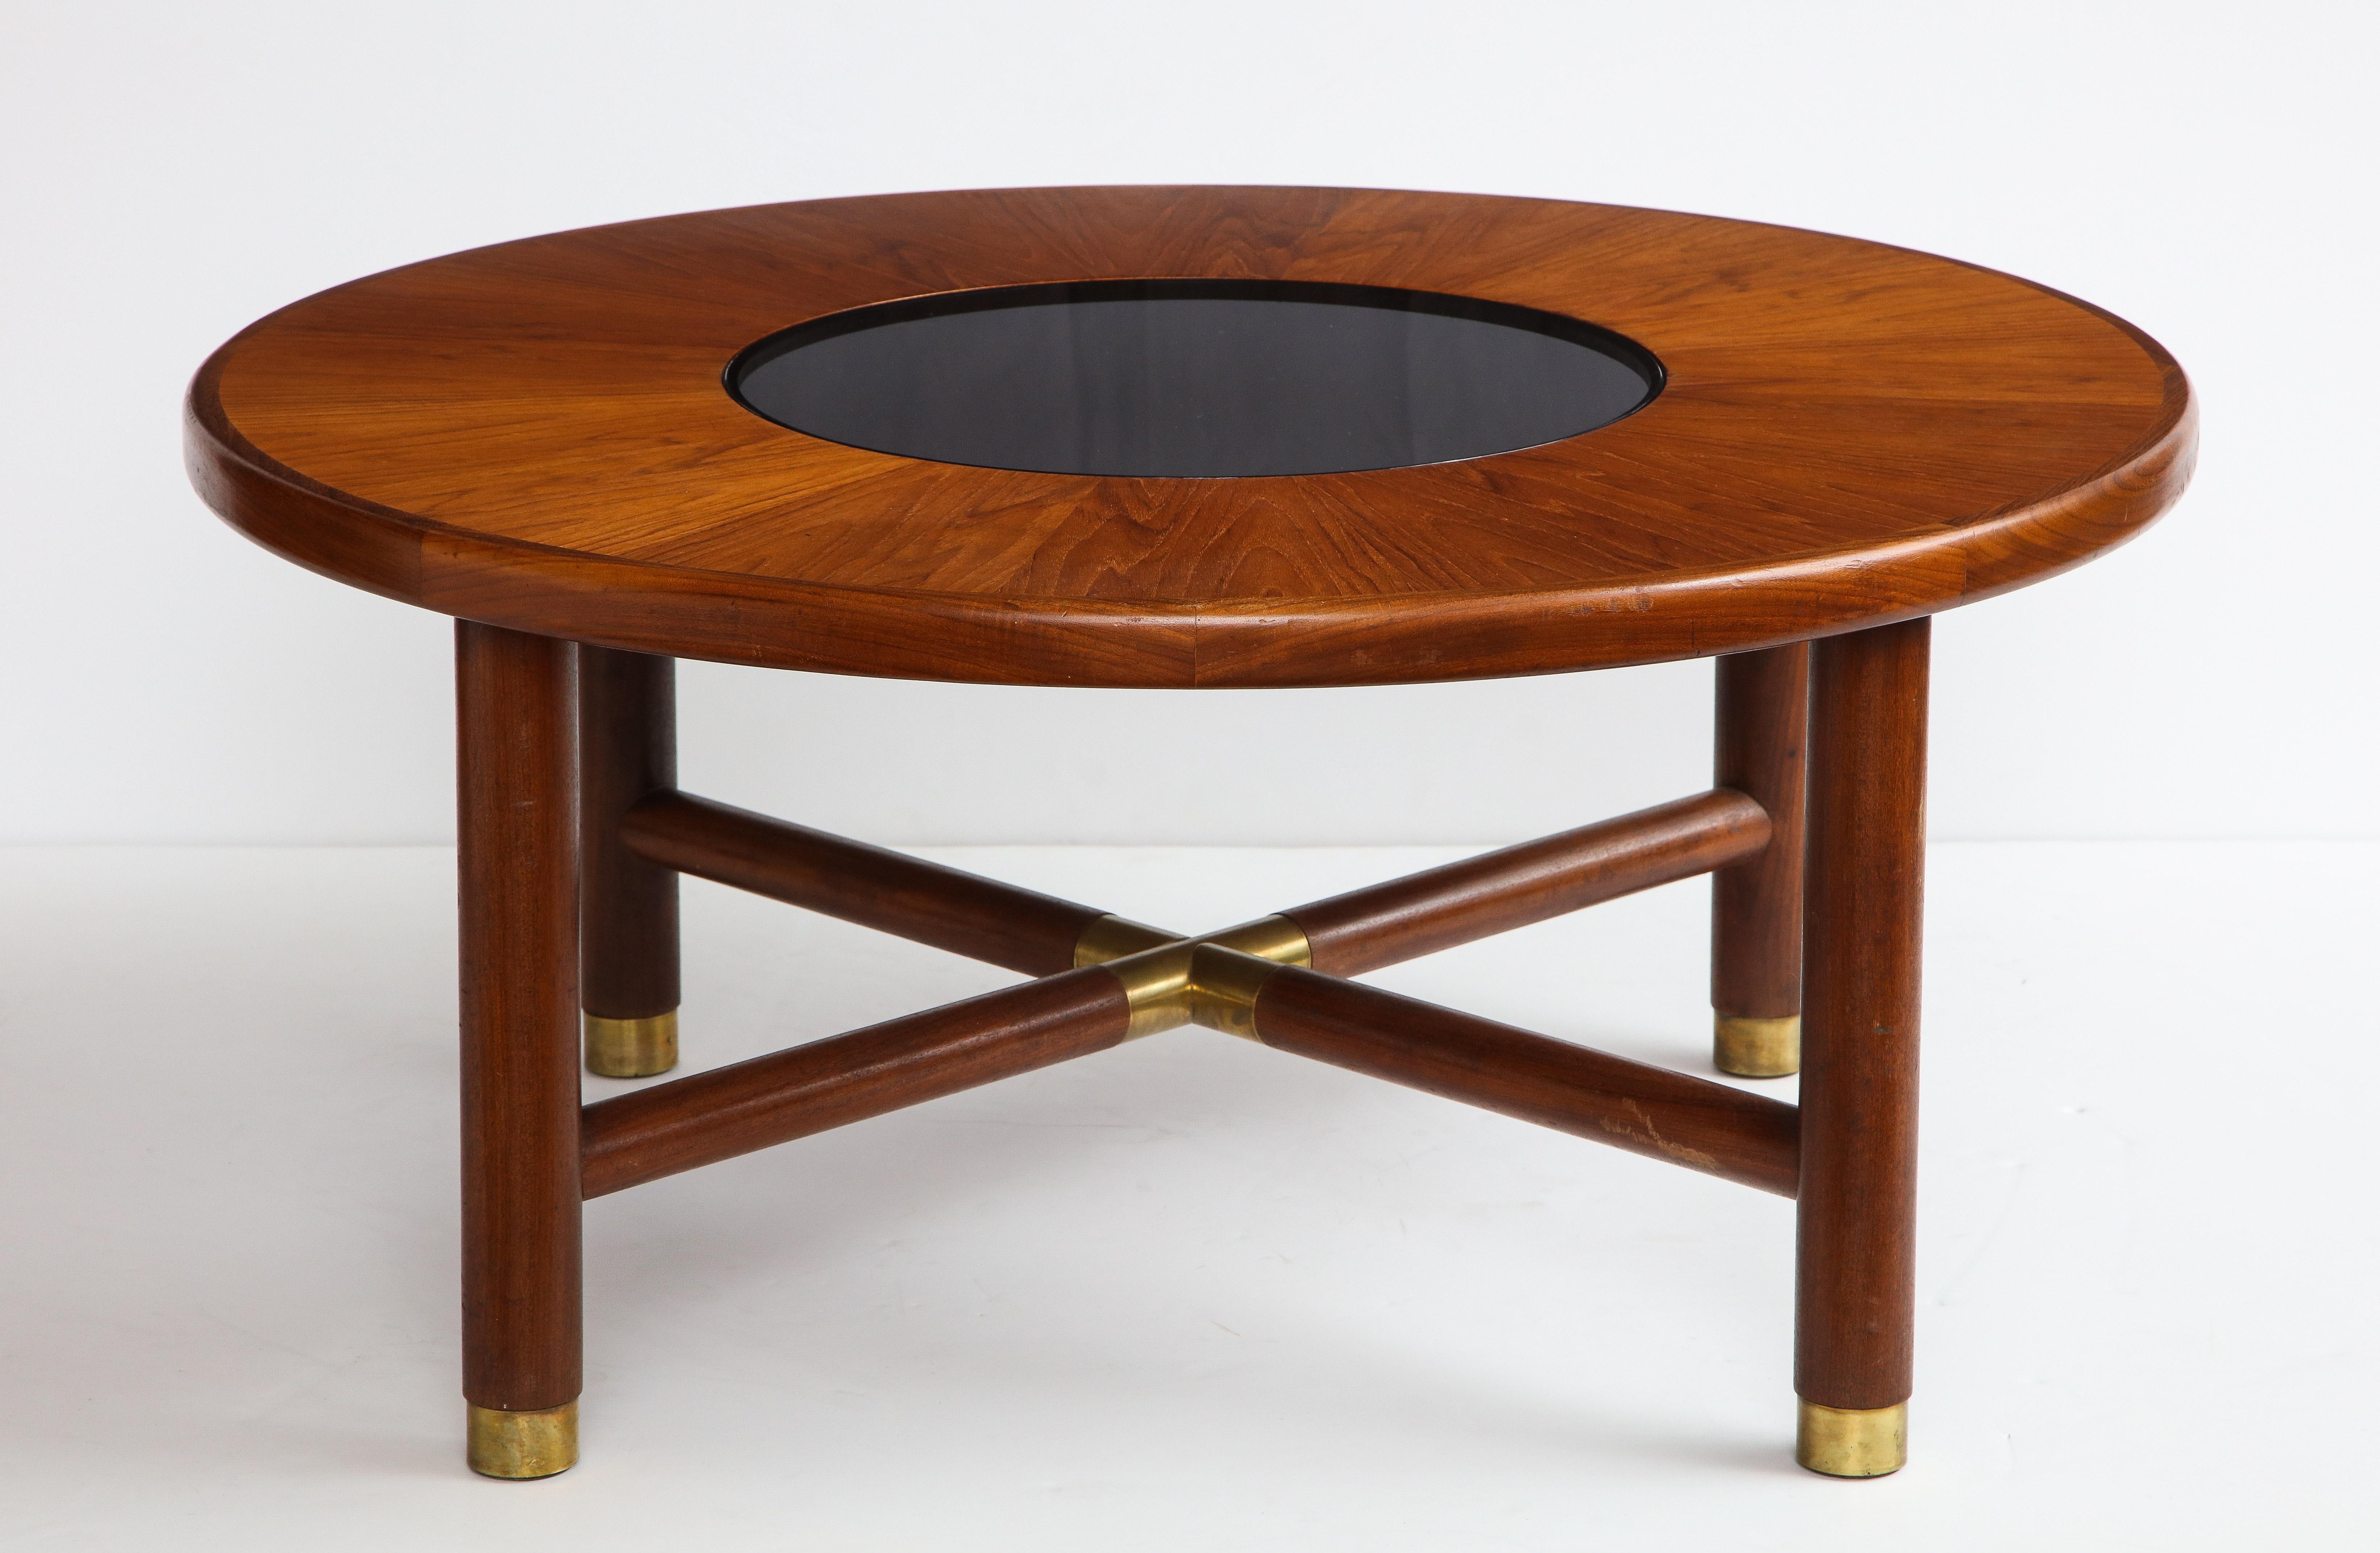 Midcentury round teak and smoked glass coffee table, United Kingdom, made by G-Plan Furniture in the 1960s. Cherry wood veneer, teak wood base with patinated brass accents and sabots. Surface scratches on the brass feet. Dark smoked glass center